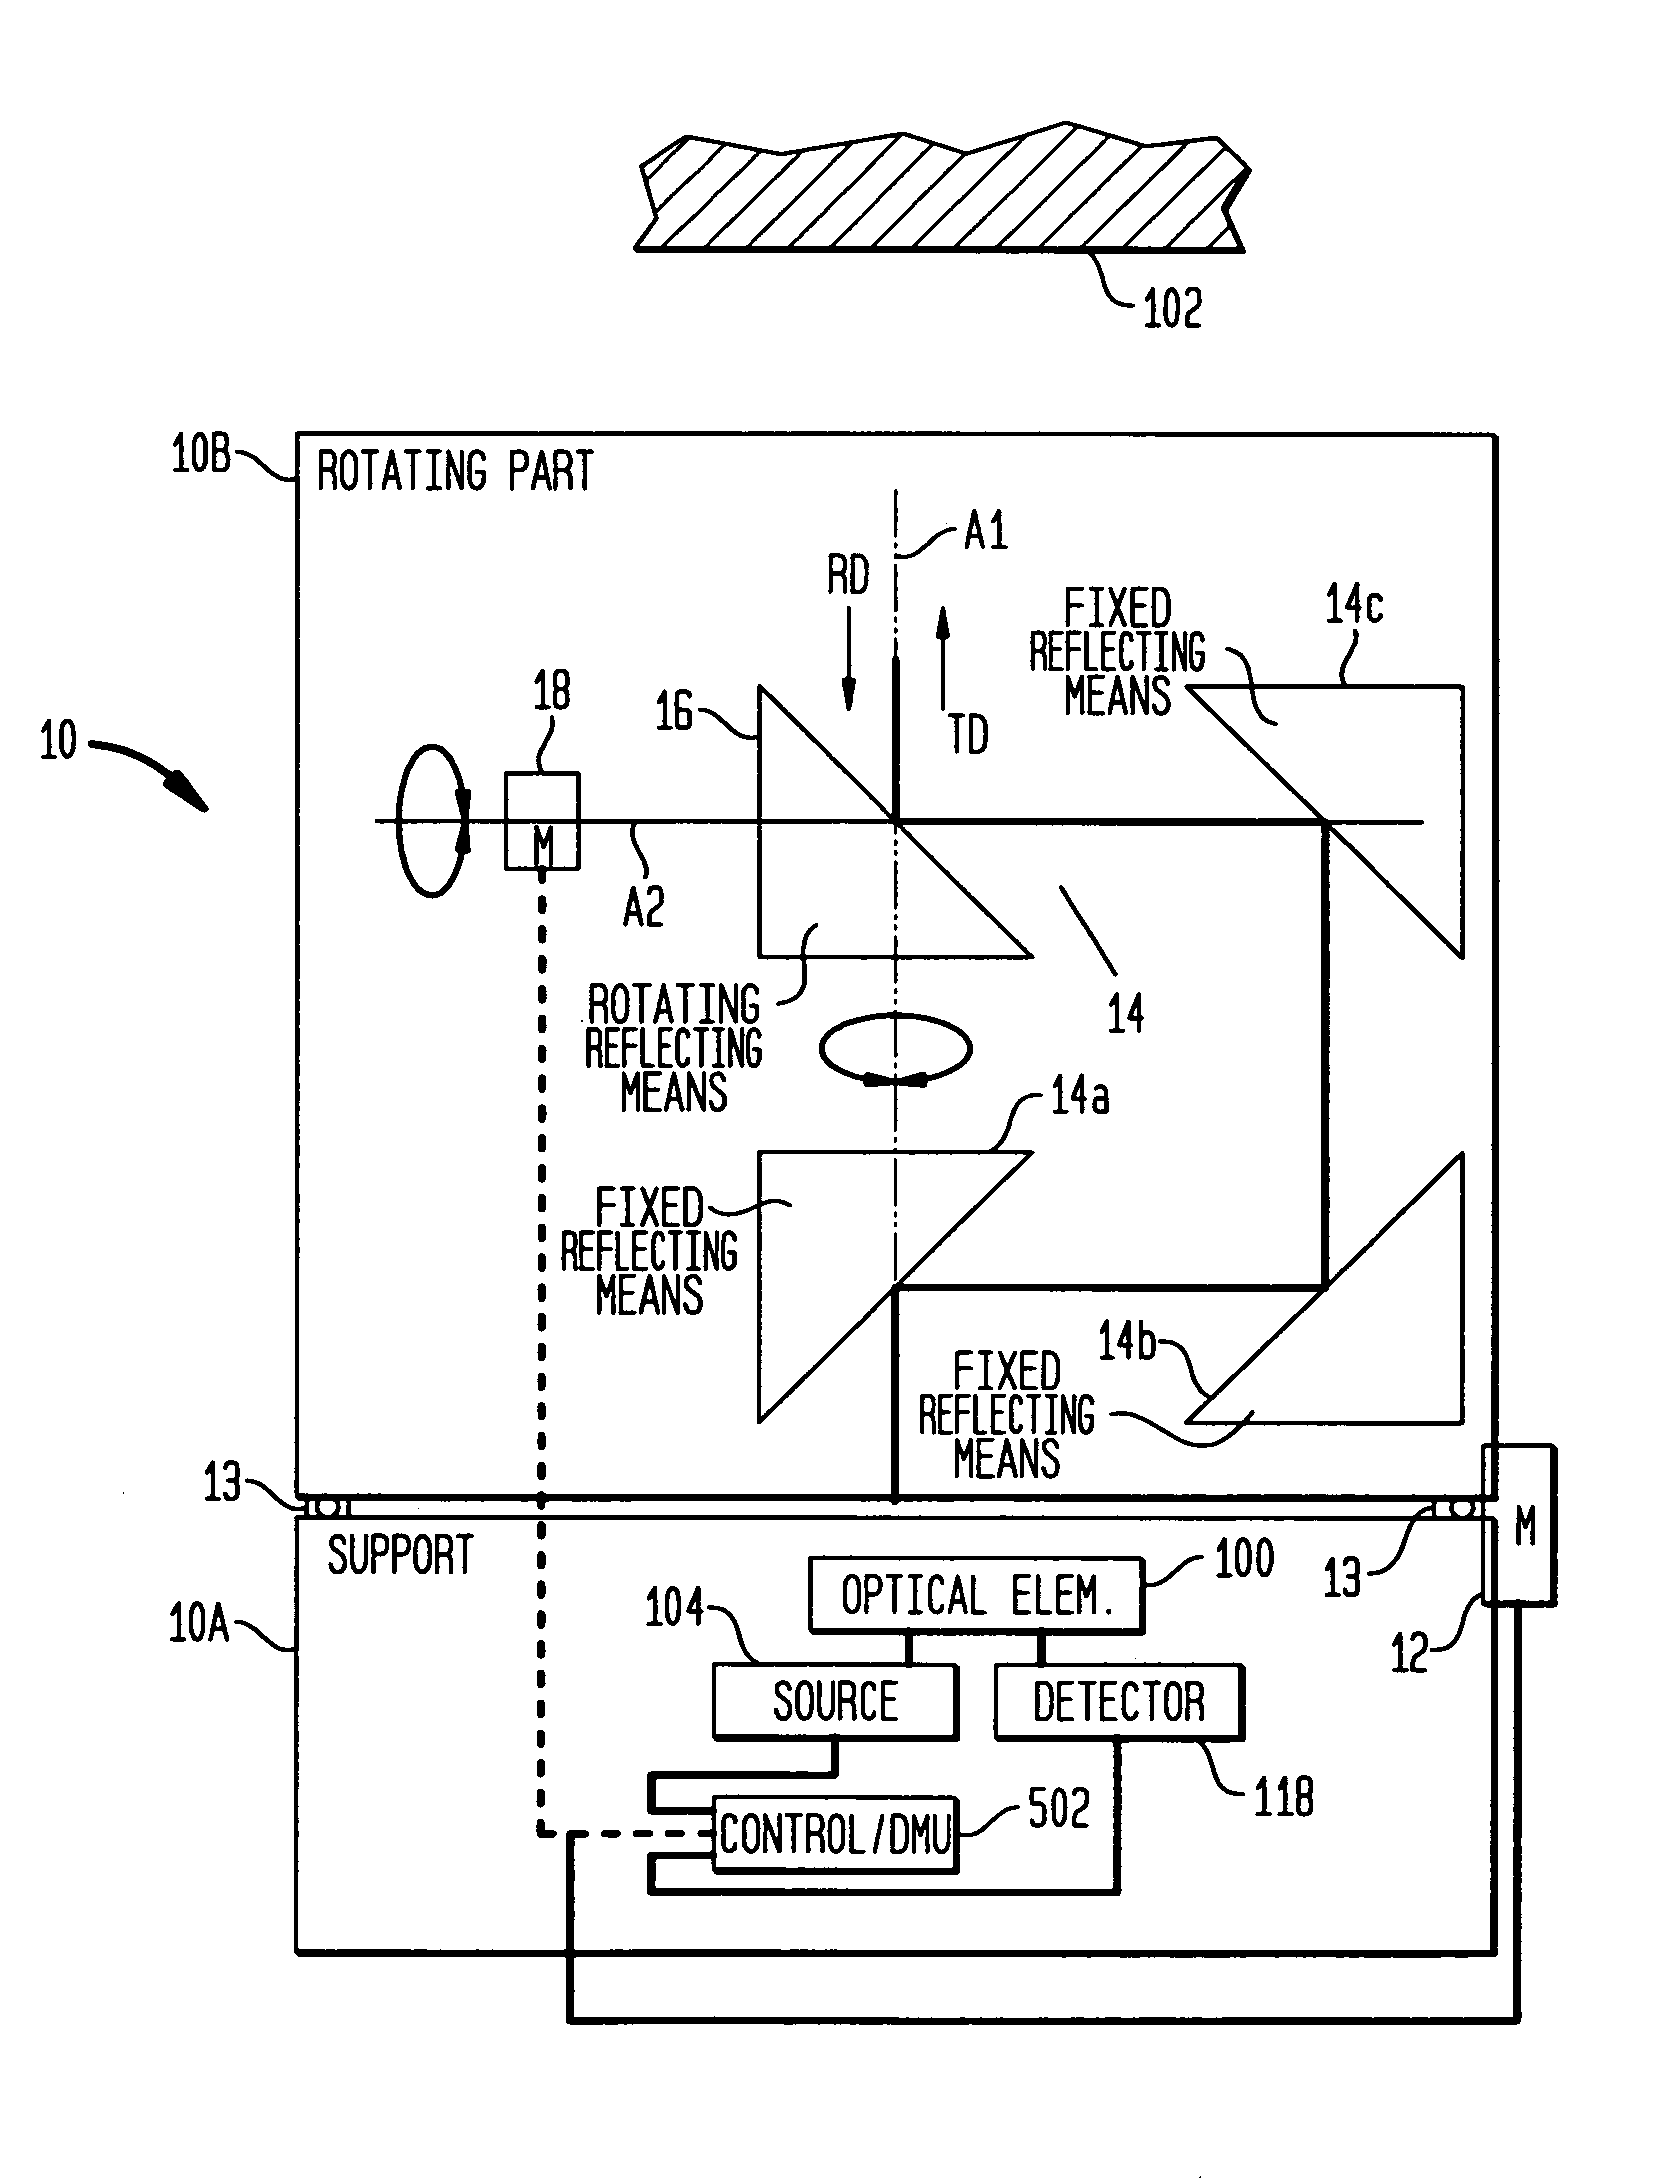 Three-dimensional measuring apparatus for scanning an object and a measurement head of a three-dimensional measuring apparatus and method of using the same